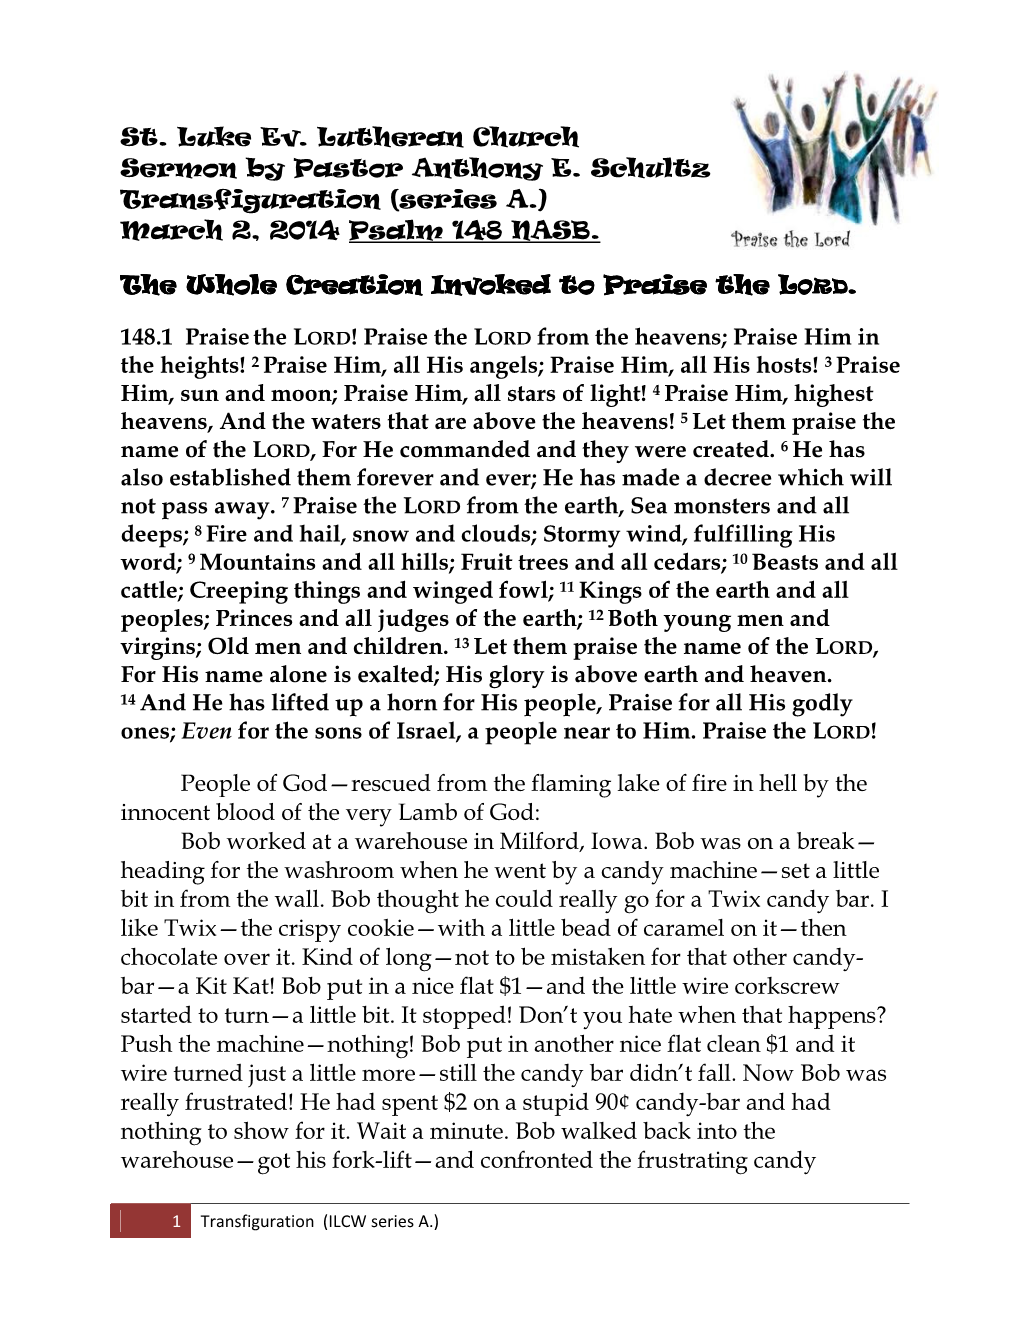 Psalm 148 Transfiguration March 2. 2014 Series A..Docx